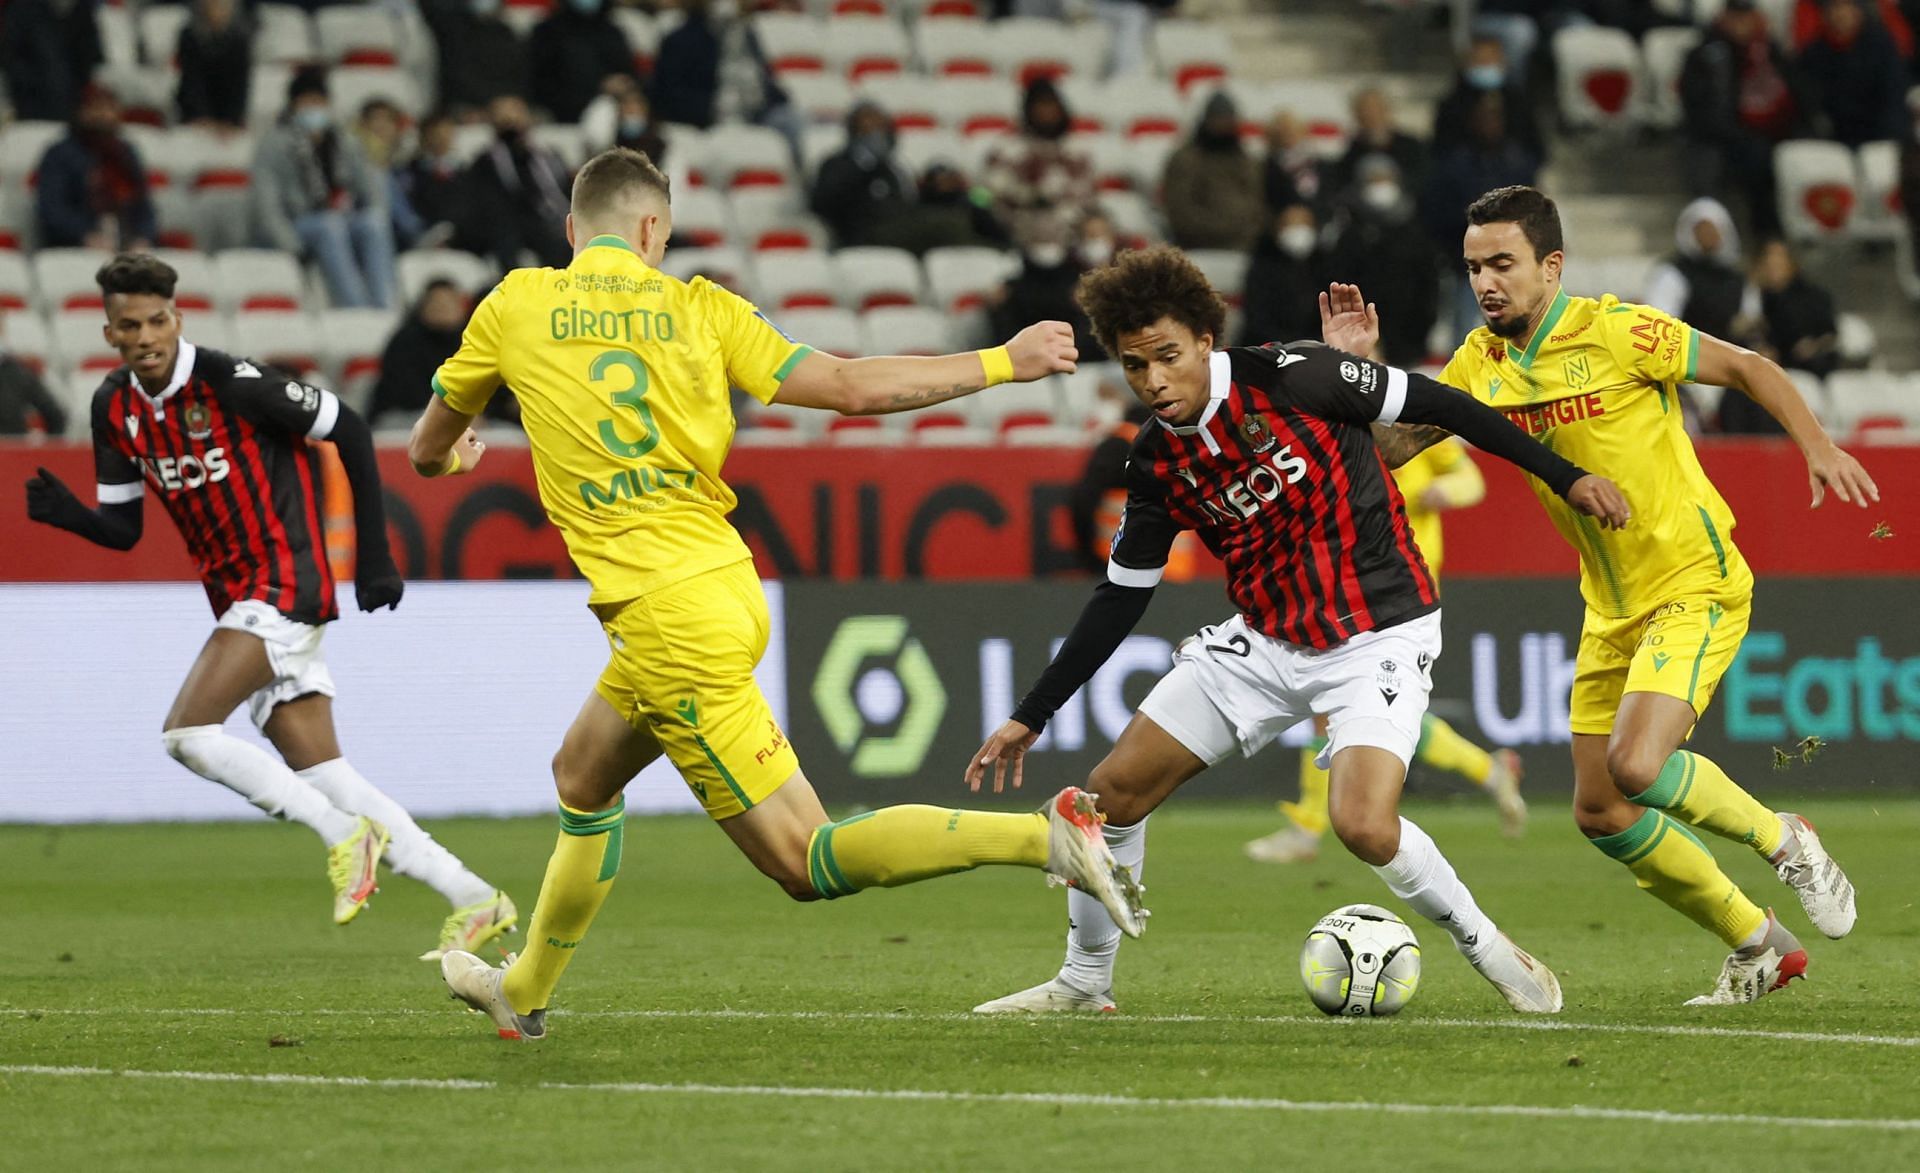 Guingamp vs nice betting tips crypto it means cryptography